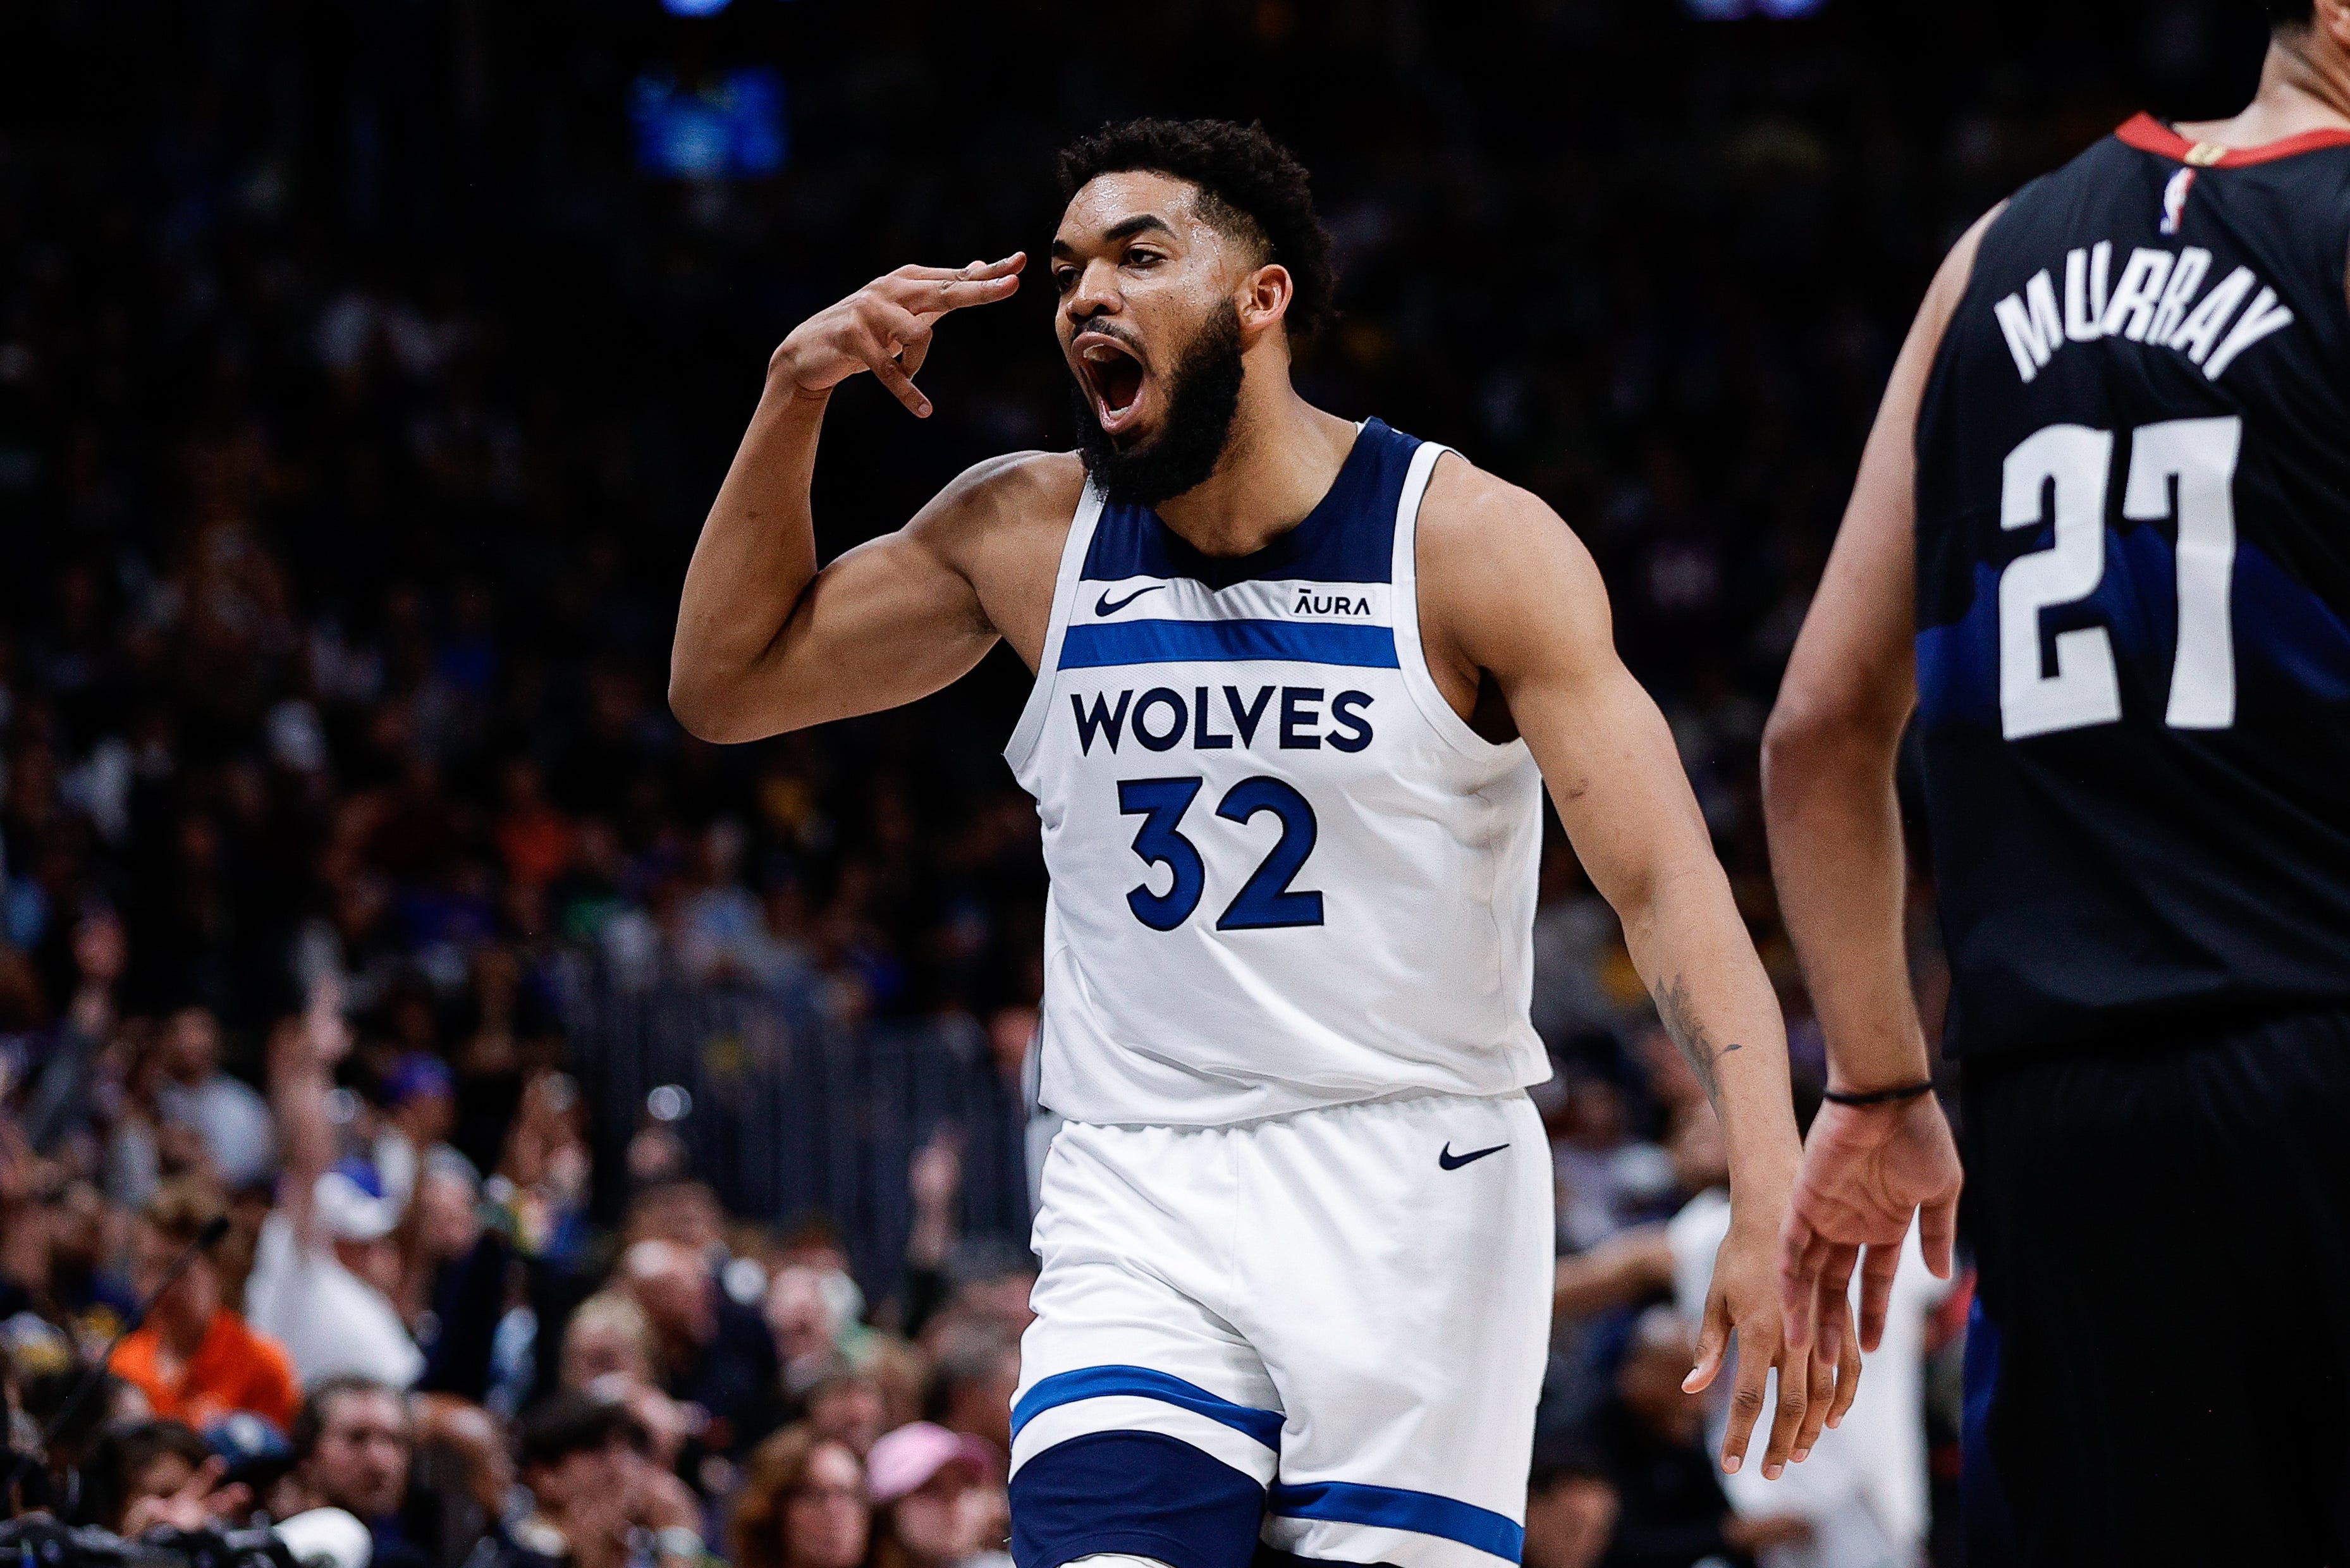 minnesota timberwolves dominate denver nuggets to take 2-0 nba playoff series lead